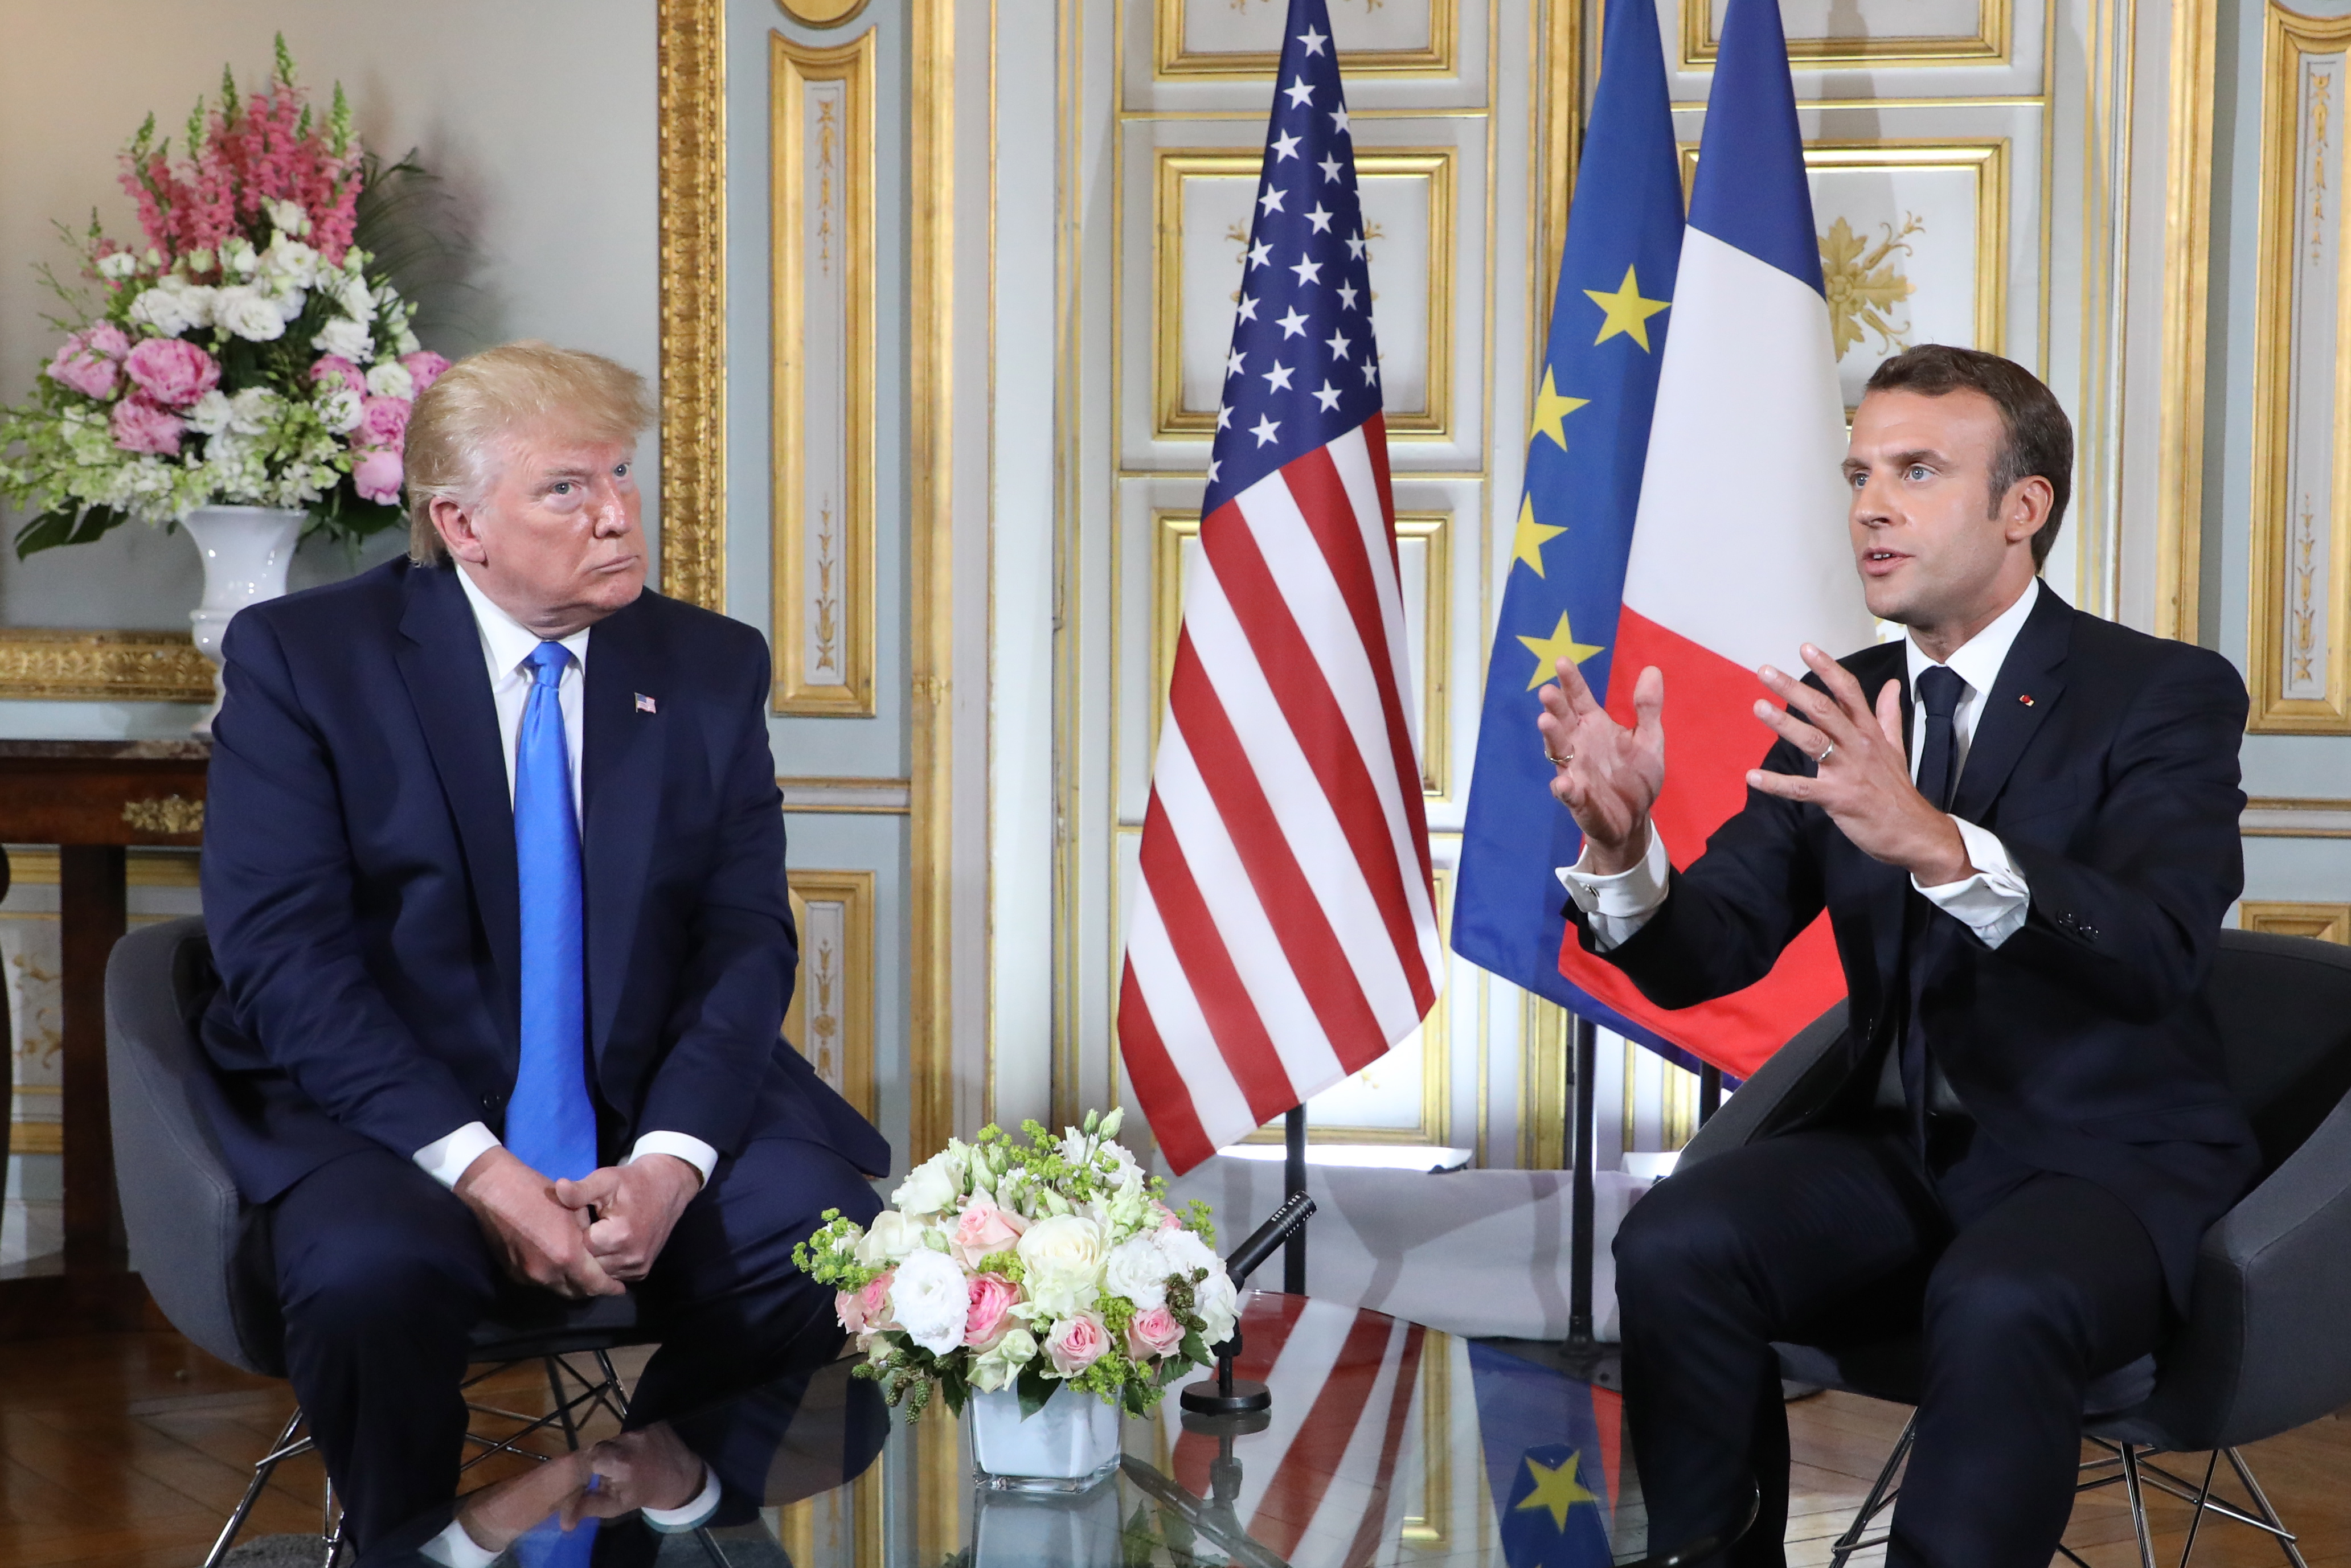 epa07630157 US President Donald Trump (L) and French President Emmanuel Macron (R) speak during a bilateral meeting on the sidelines of D-Day commemorations at the Prefecture of Caen, Normandy, France, 06 June 2019. World leaders are attending memorial events in Normandy, France to mark the 75th anniversary of the D-Day landings, which marked the beginning of the end of World War II in Europe.  EPA/LUDOVIC MARIN / POOL  MAXPPP OUT